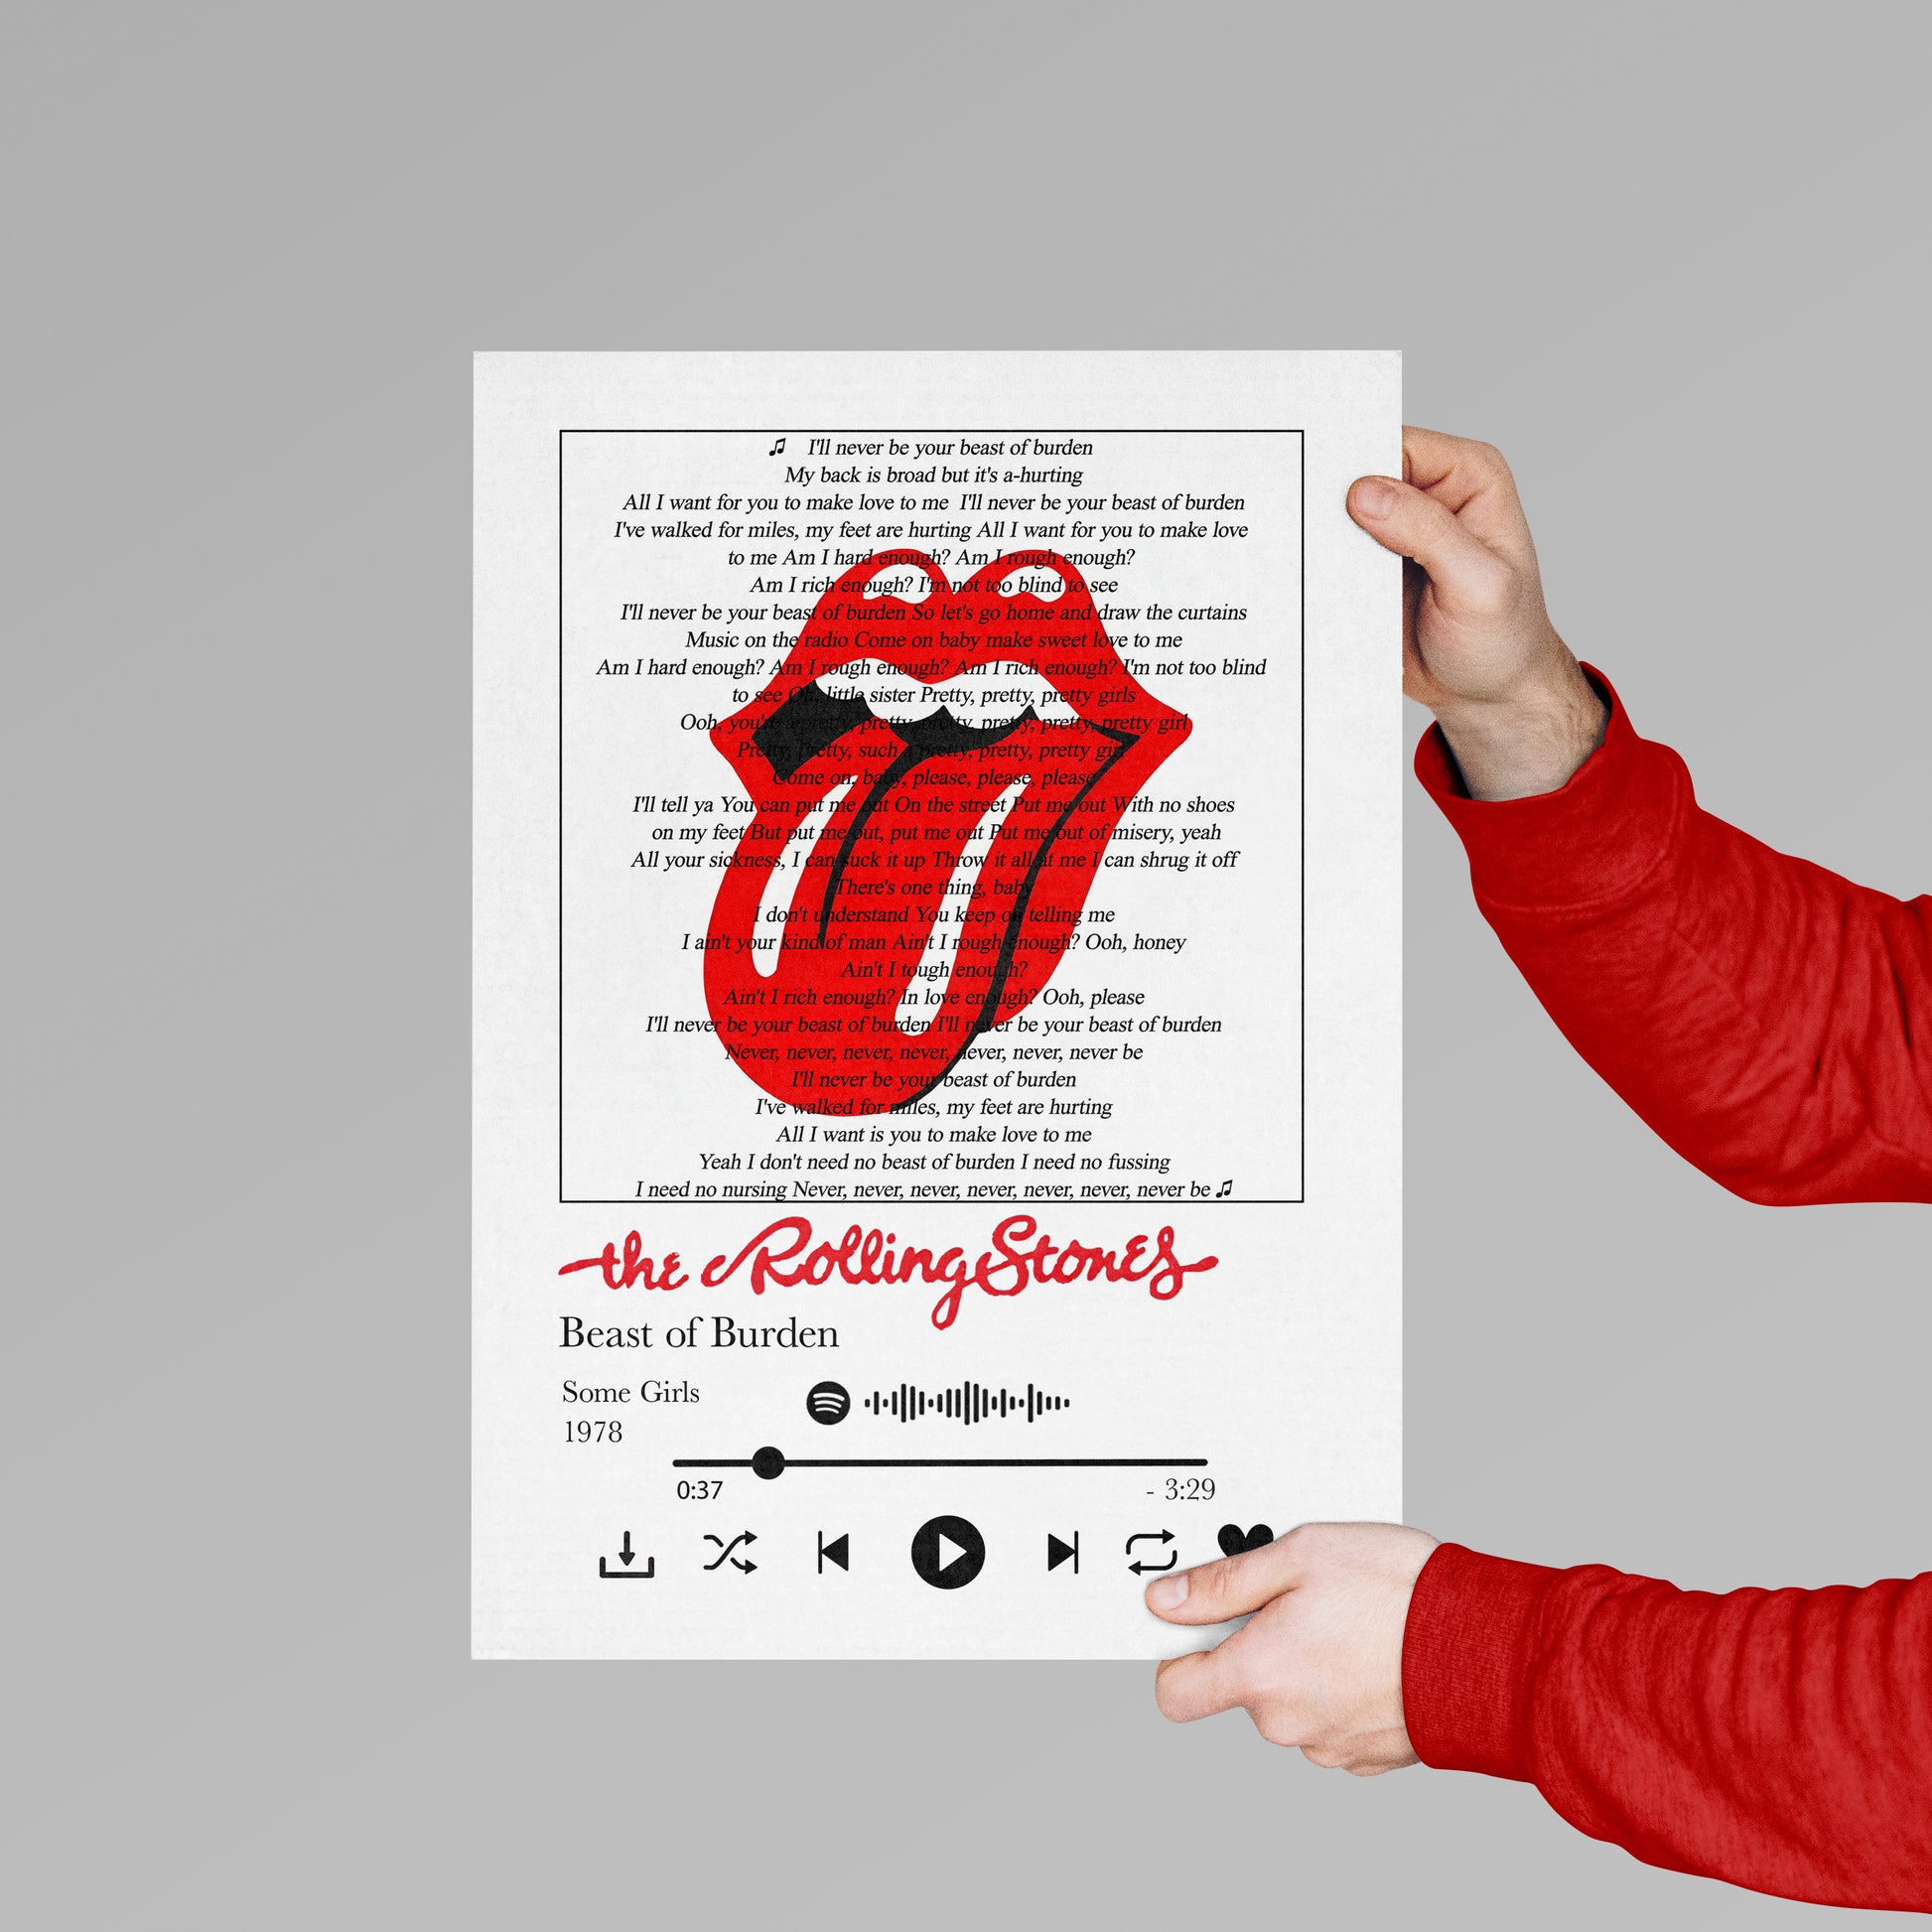 Discover the perfect wall art to express your favorite song, <a rel="noopener" href="https://www.youtube.com/watch?v=RlV-ZFyVH3c" target="_blank">Rolling Stones - Beast of Burden</a>&nbsp;Lyrics Prints. Our free song lyrics print come in elegant colorful designs, artwork from song lyrics, personalized lyrics to print, and more, with hundreds of unique designs to choose from. Buy now and get inspired!